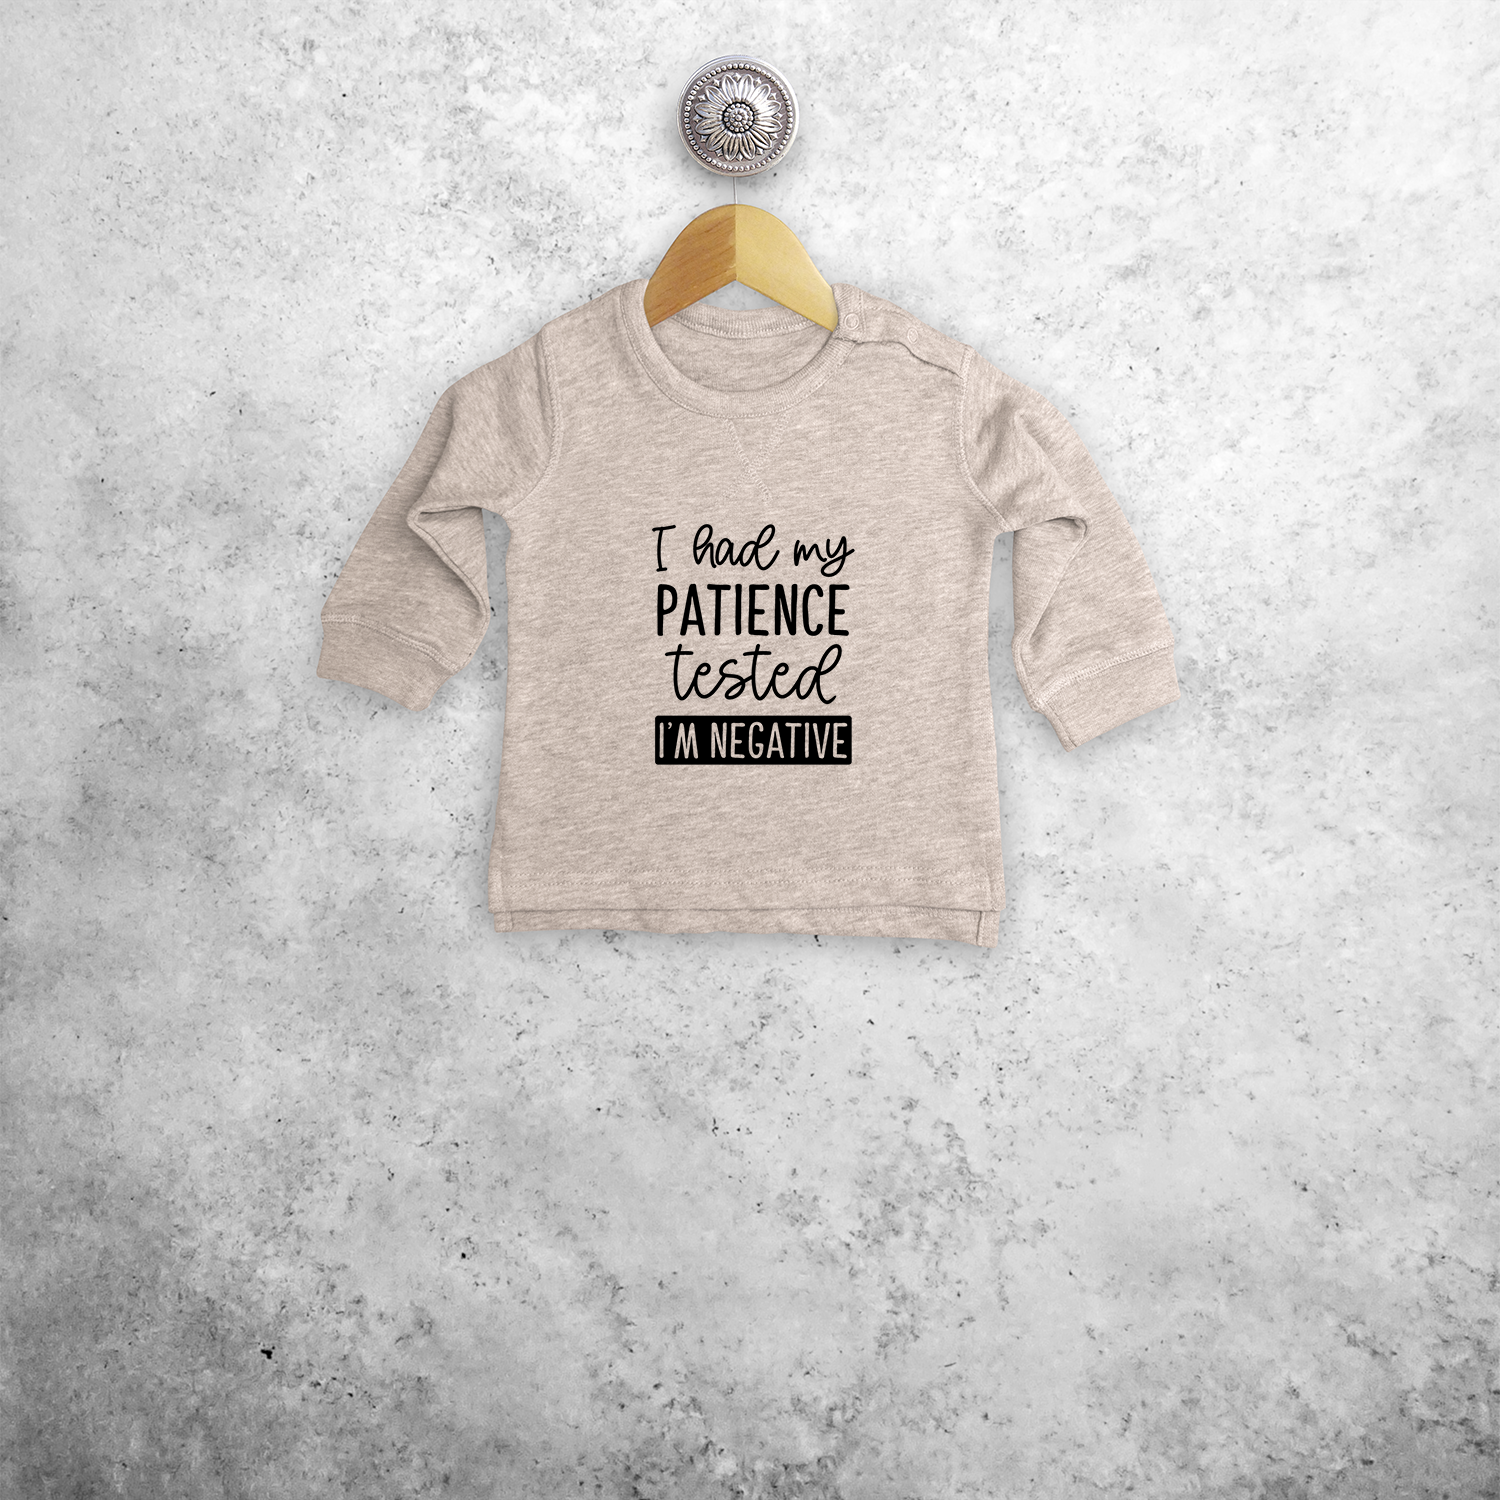 'I had my patience tested - I'm negative' baby sweater